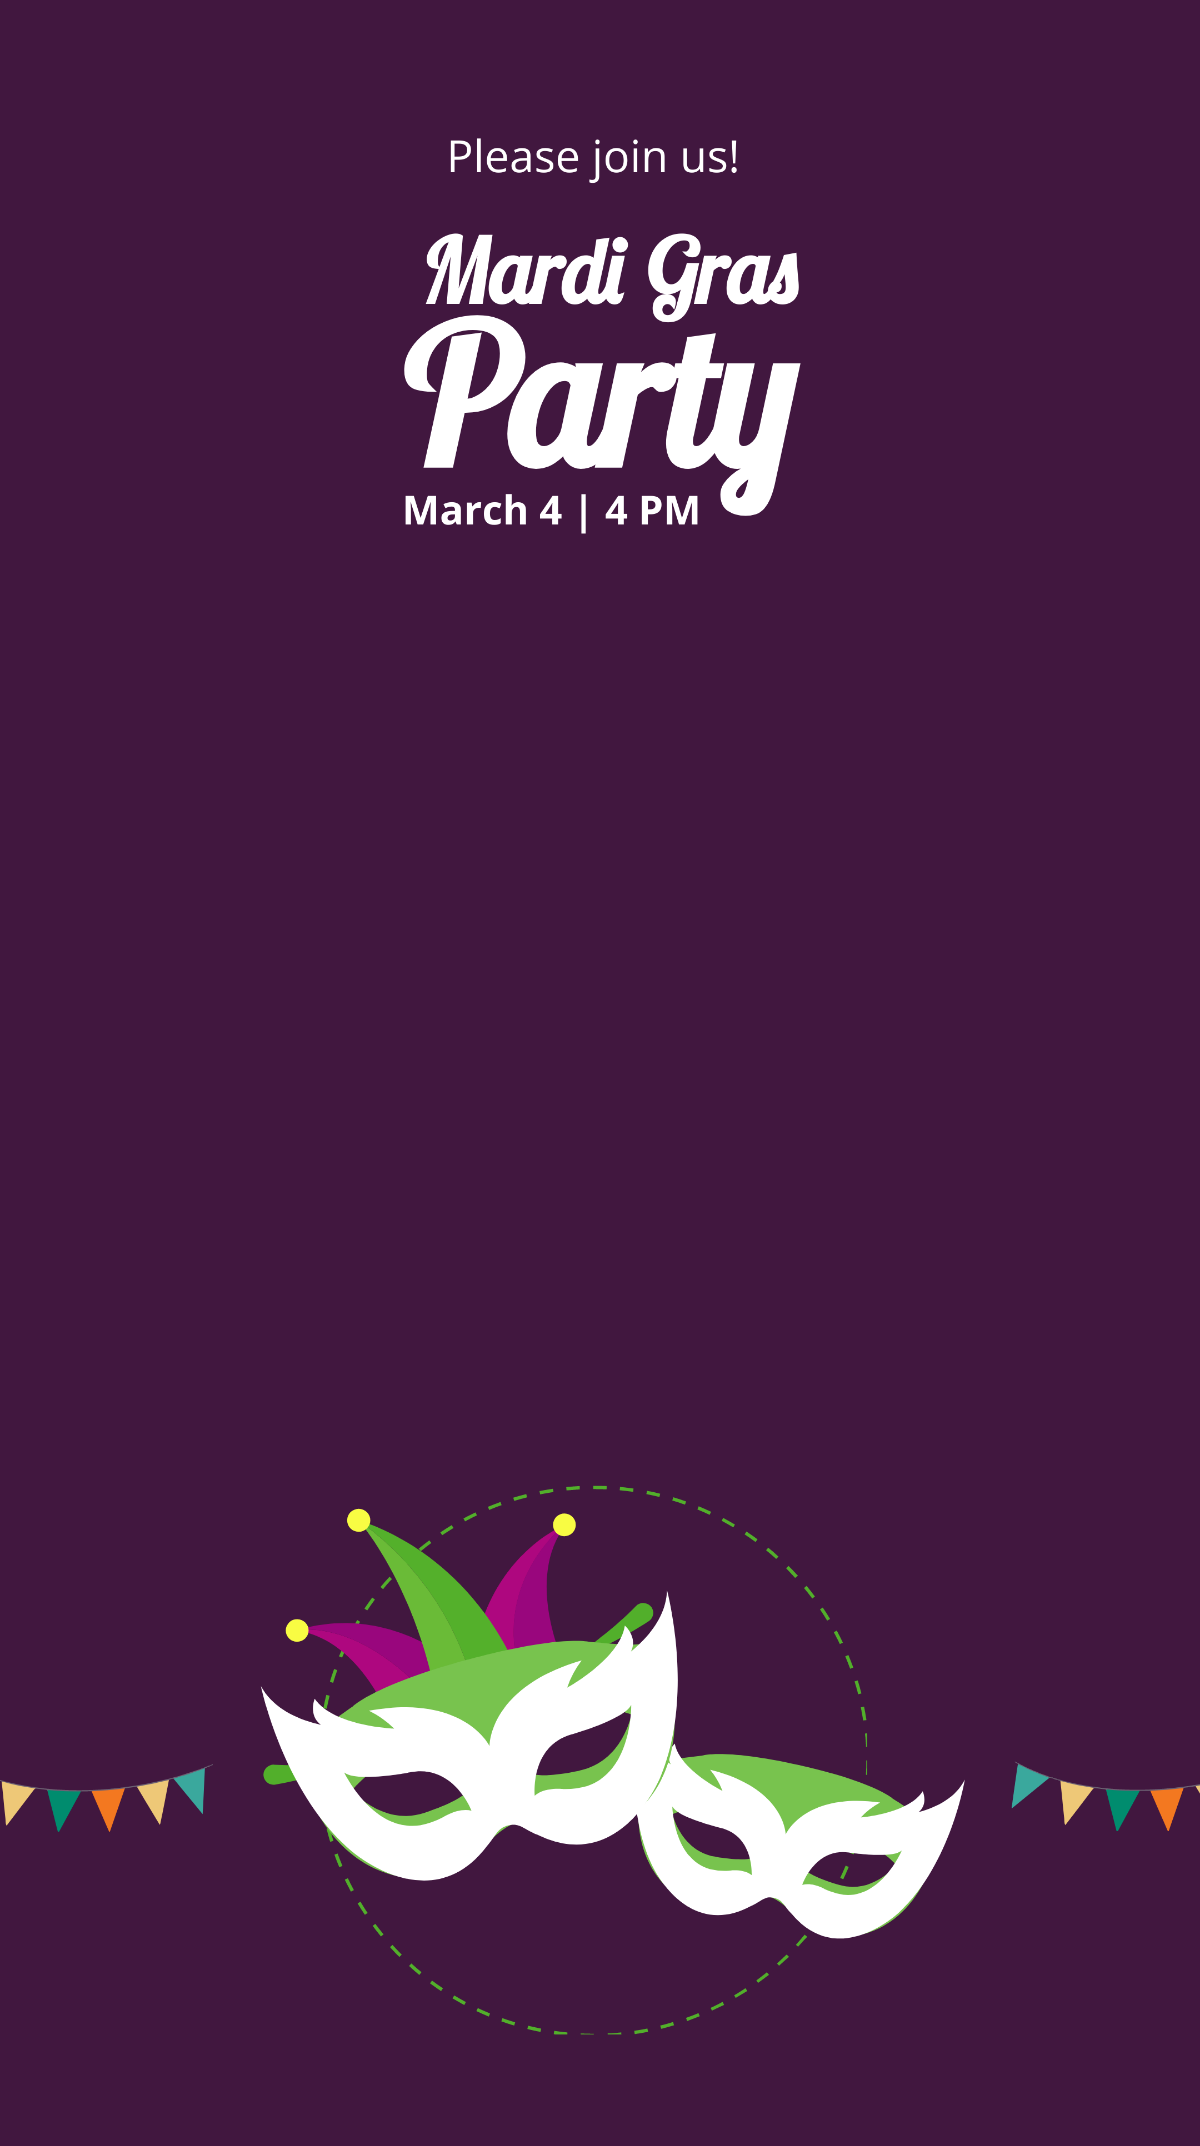 Mardi Gras Party Snapchat Geofilter Template